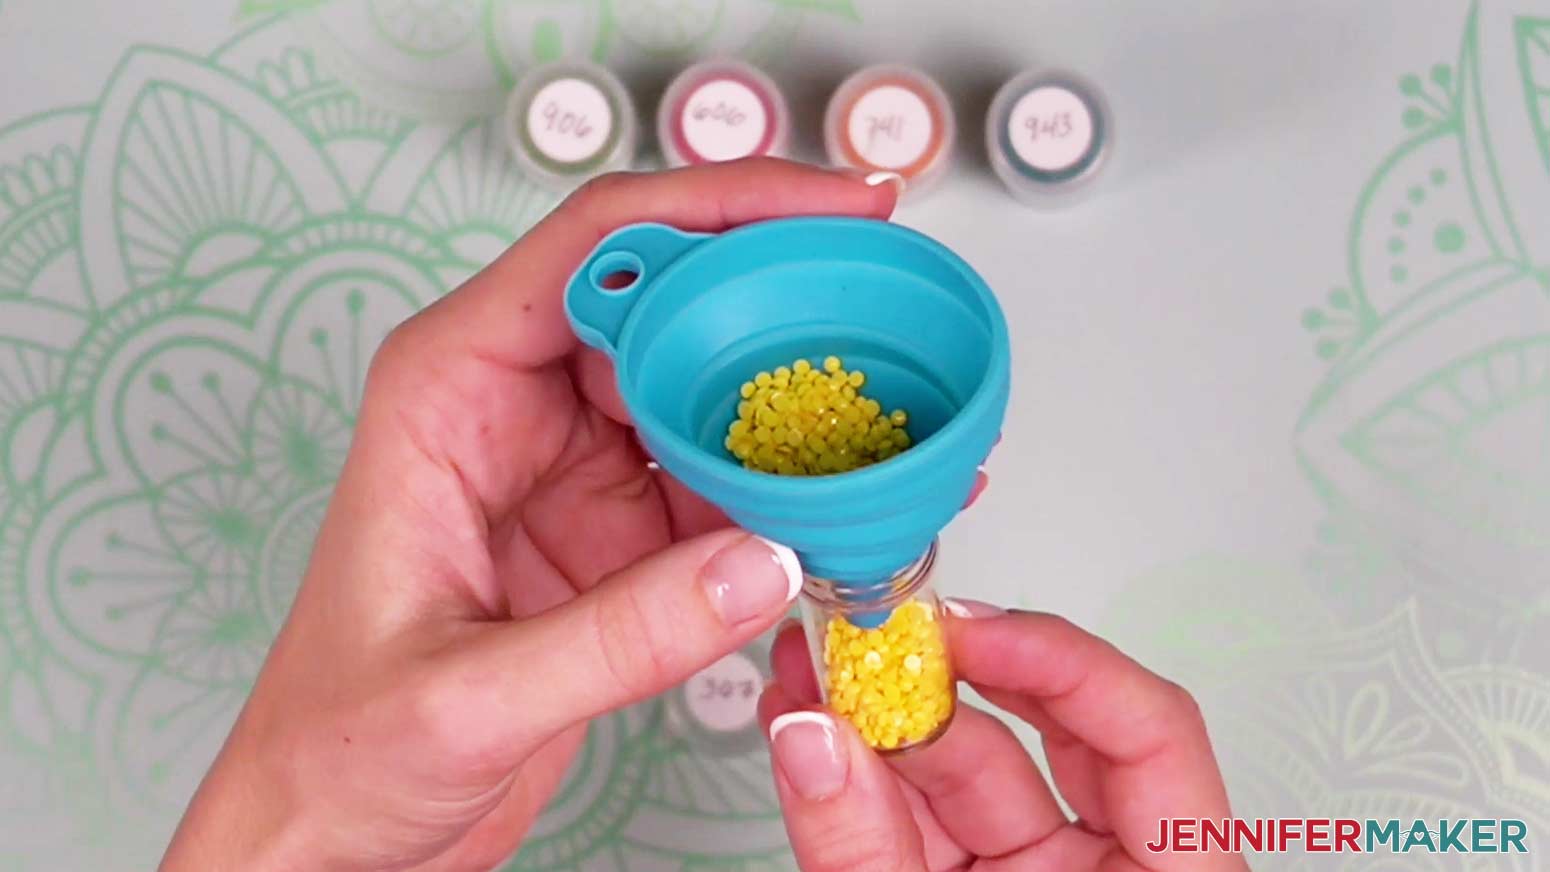 Use a funnel to fill the vial with the color diamond drills.